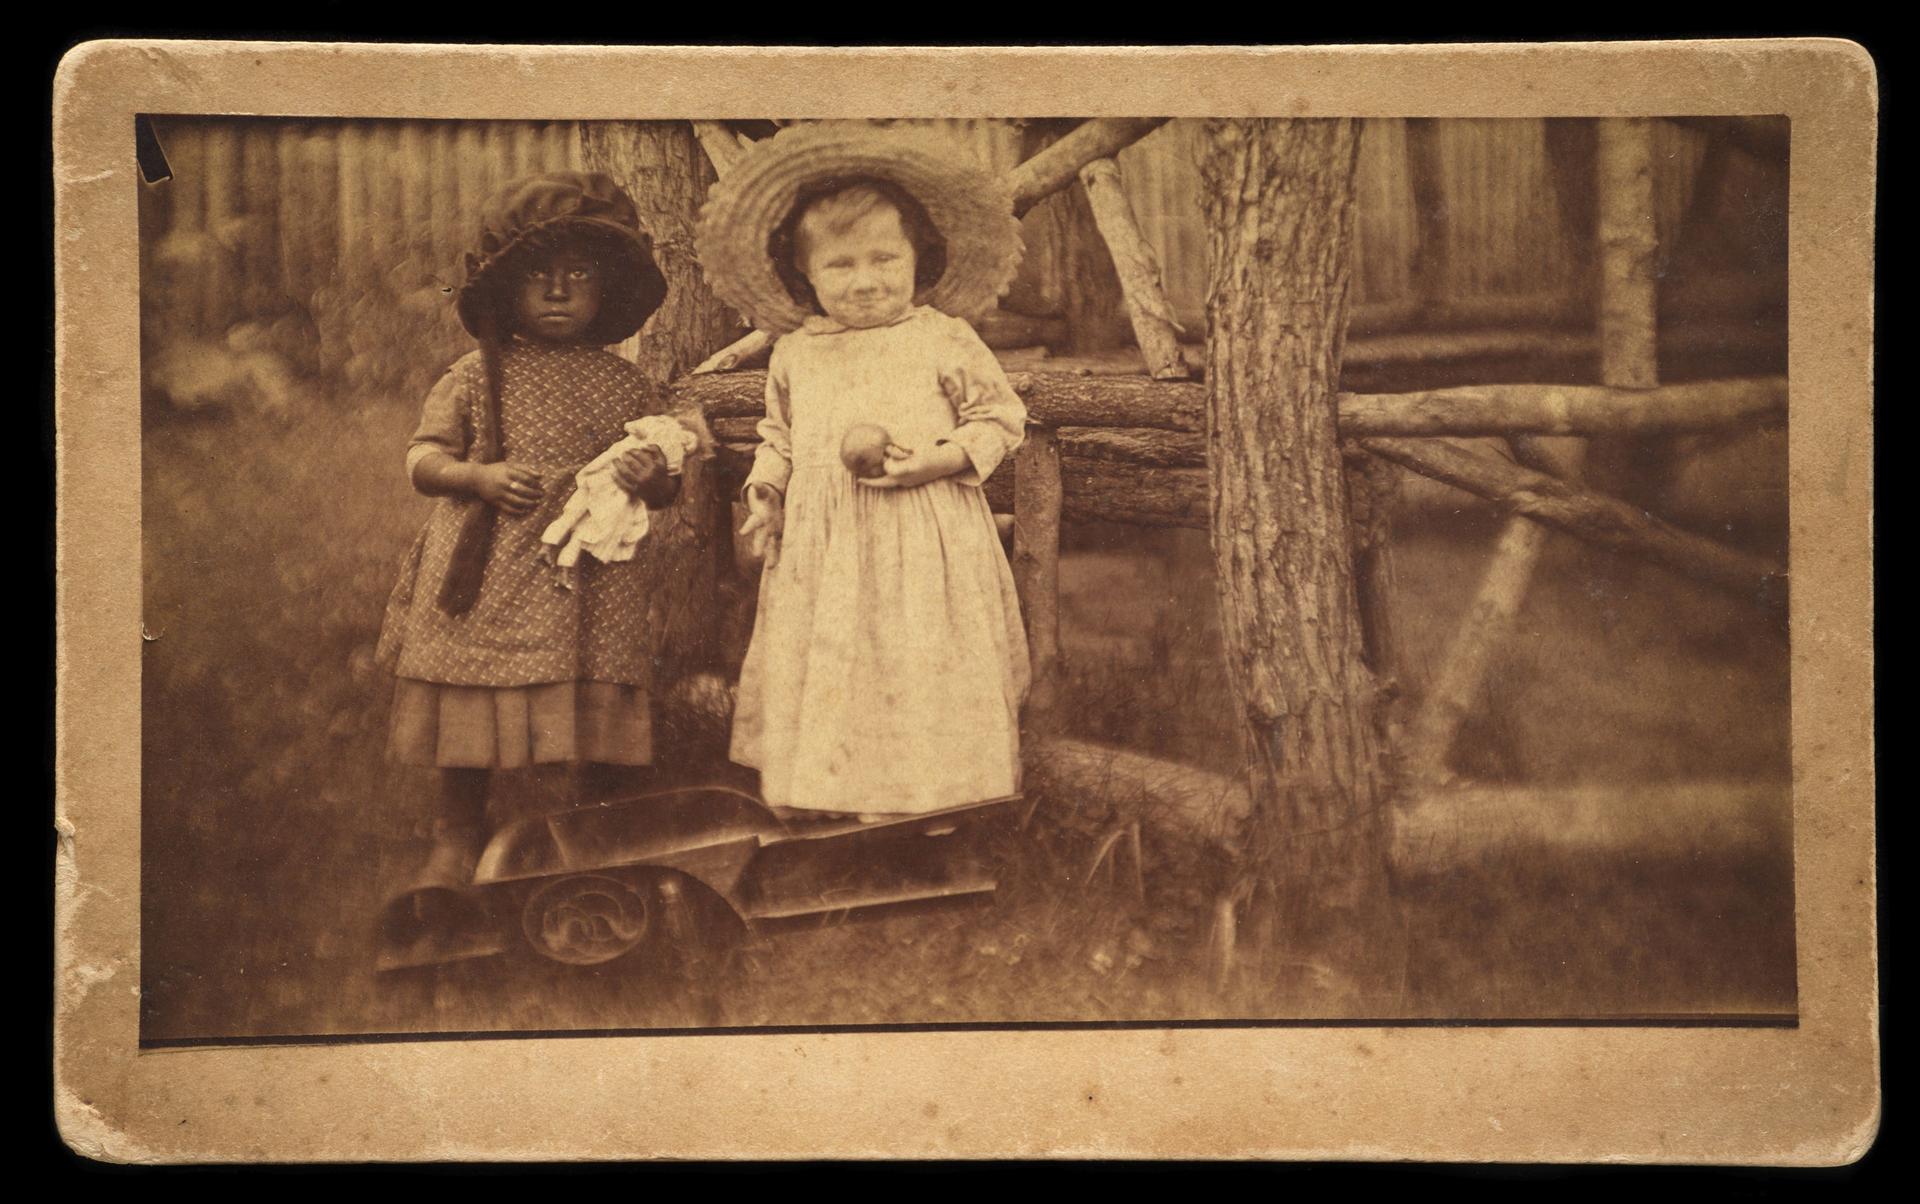 Unidentified photographer, Albumen print, Berlin, OH, 1889  Inscribed on back: “Emmett H. Tuttle &amp; Gertrude Campbell At play July 23rd 1889.”